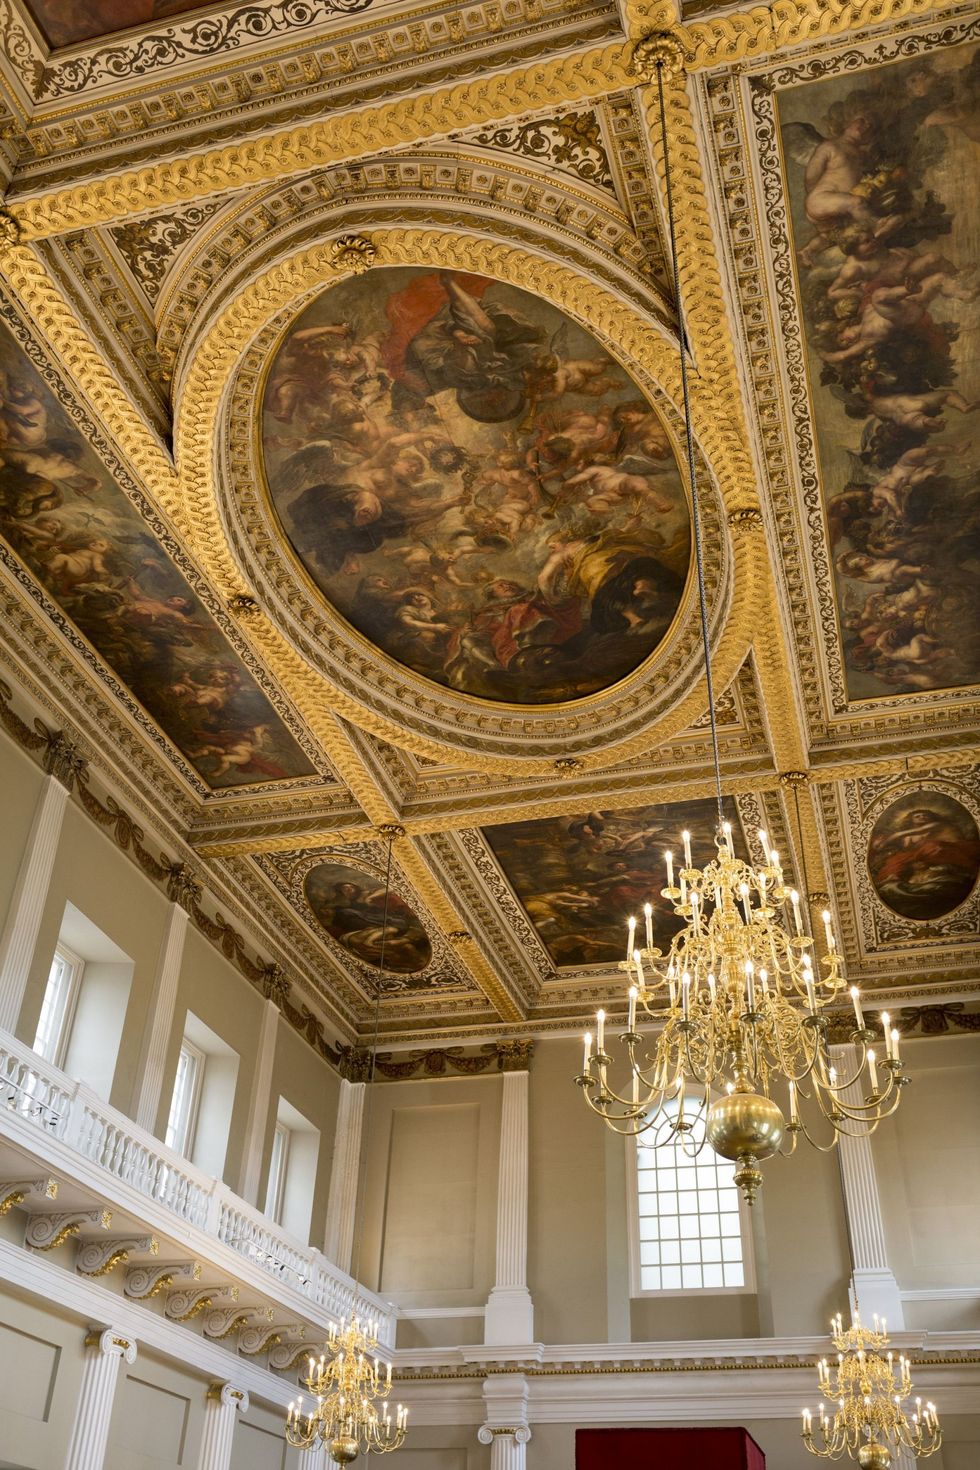 <p>Though no longer a residence per se, this opulent hall gives a glimpse at what the largest palace in Europe once looked like. The Banqueting House is the only remaining structure from the Palace of Whitehall, which served as the London residence of the English monarchs from the reign of King Henry VIII until it was destroyed in a fire in 1698. This grand hall was designed by the famed architect Inigo Jones and was used by the Stuart kings to host balls, receptions, and banquets. The gilded ceiling was painted by the artist Peter Paul Rubens and is hung with massive crystal chandeliers.</p>